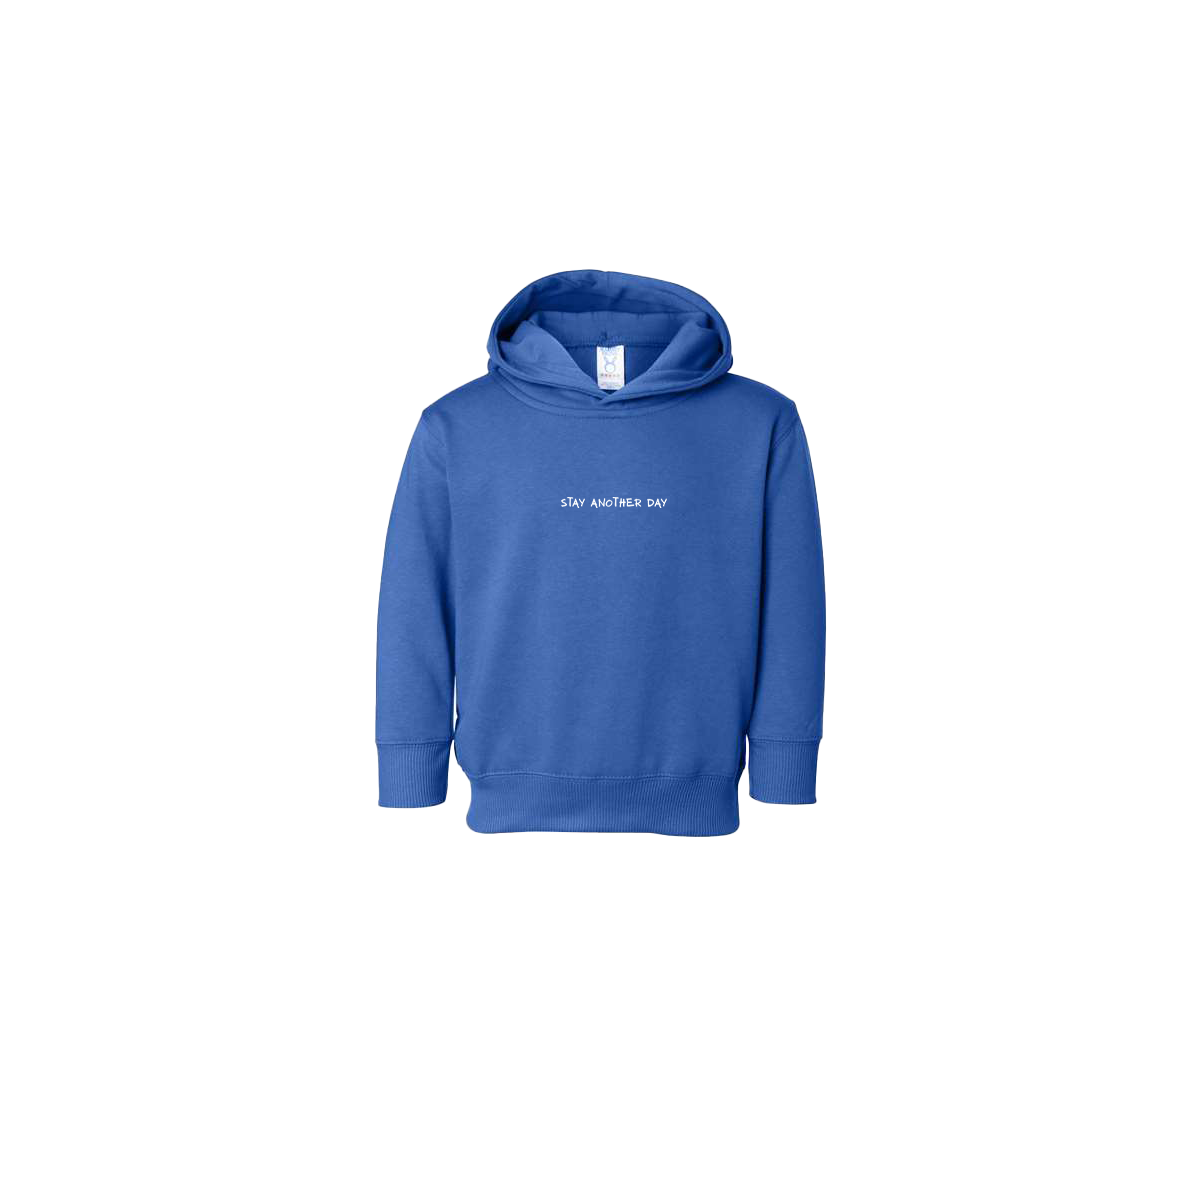 Stay Another Day Text Screen Printed Royal Blue Toddler Hoodie